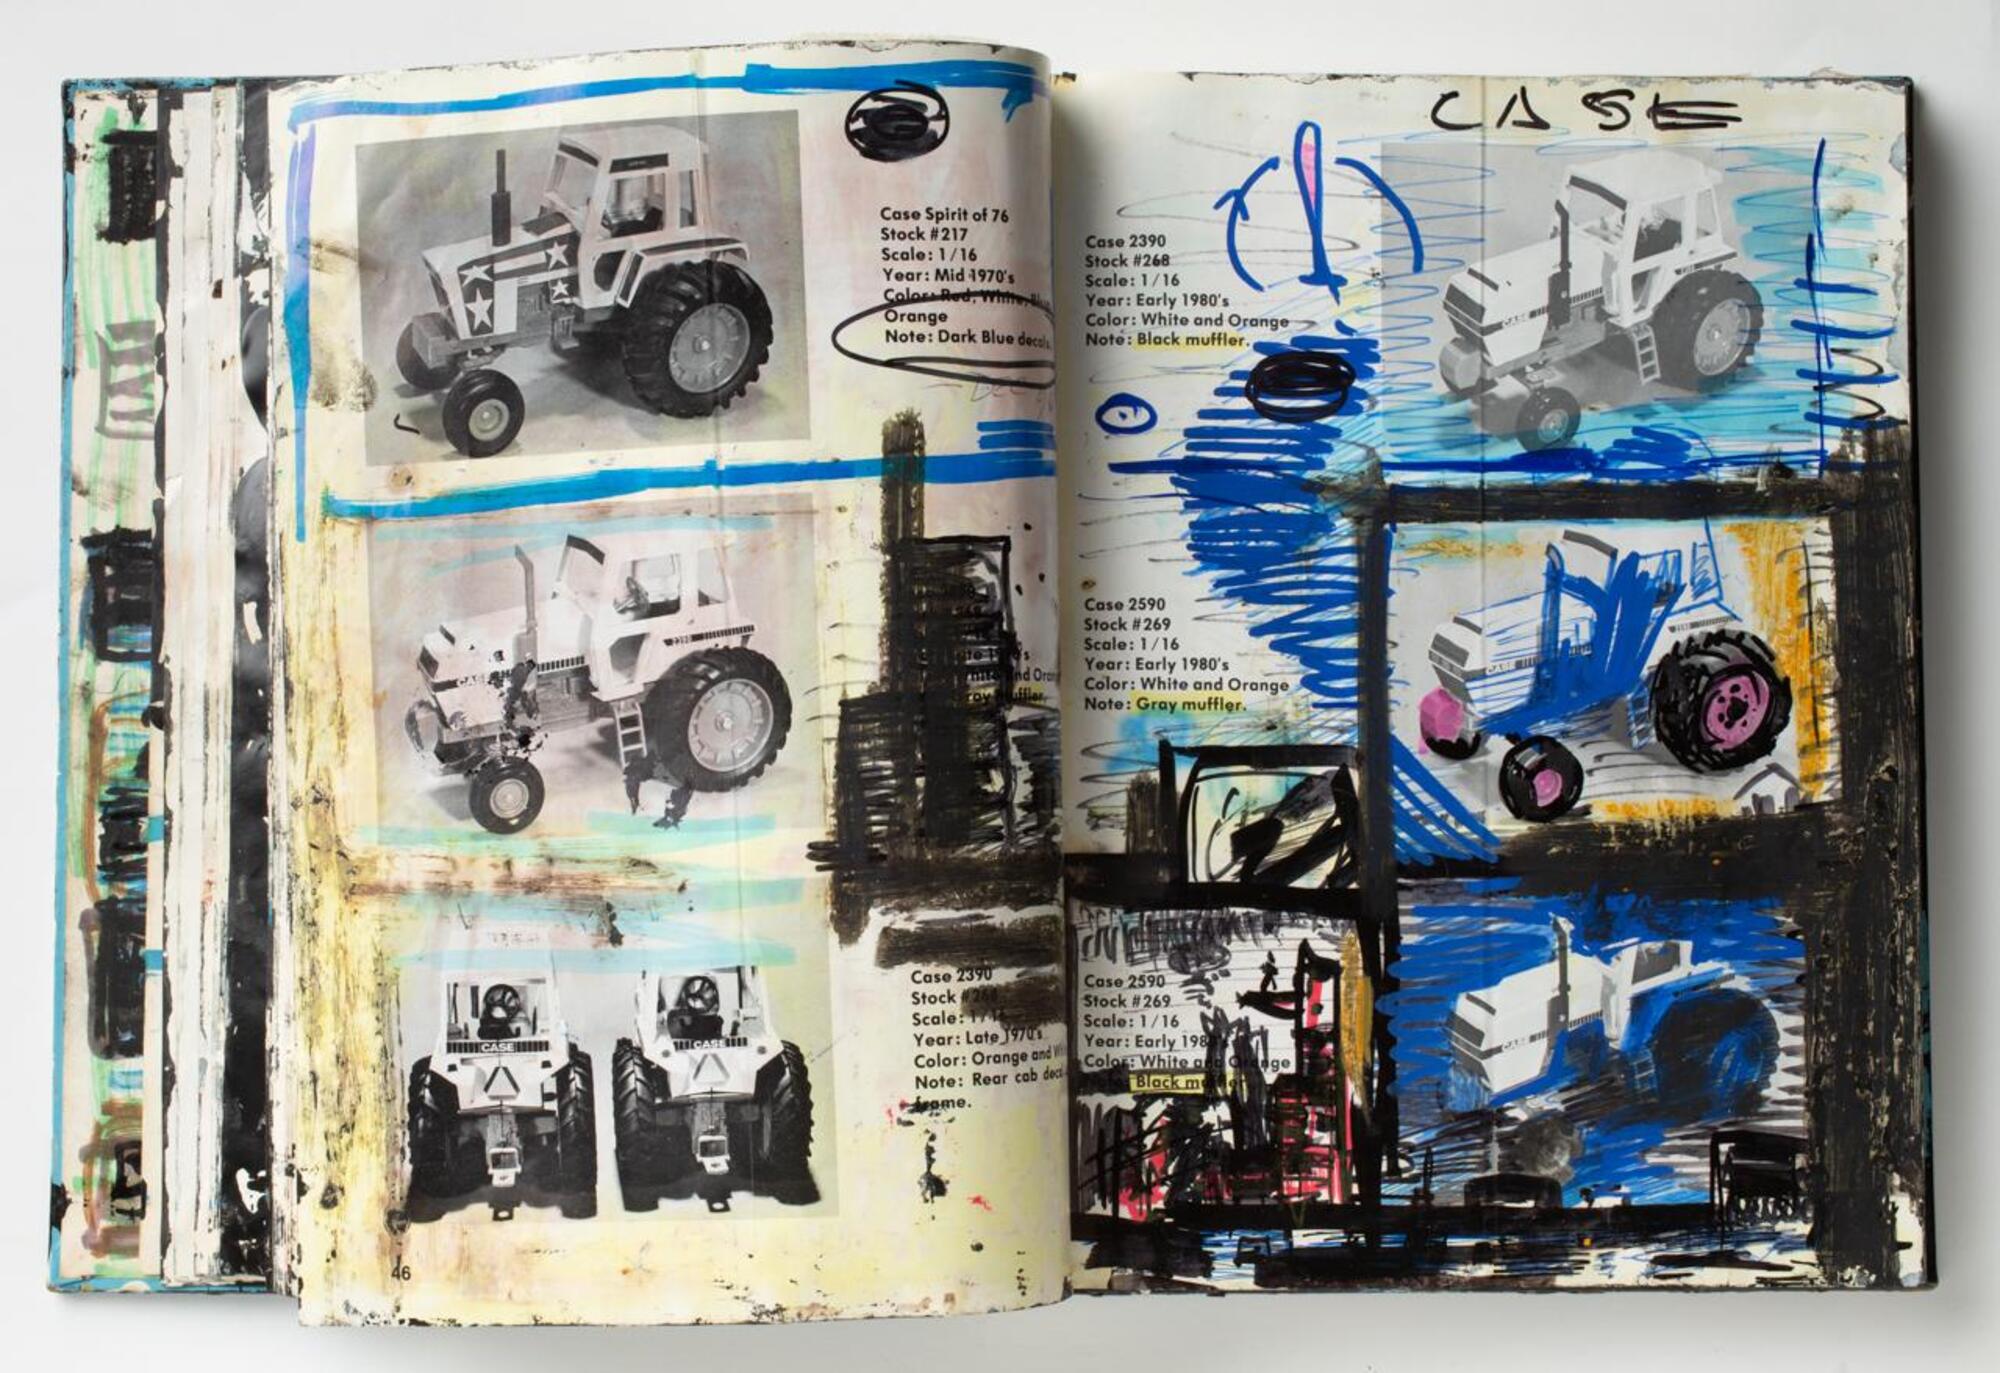 A book opened to pages displaying photographs of tractors, with tractor information listed next to each image. Black, blue, and red lines and areas of color are over and around the images.